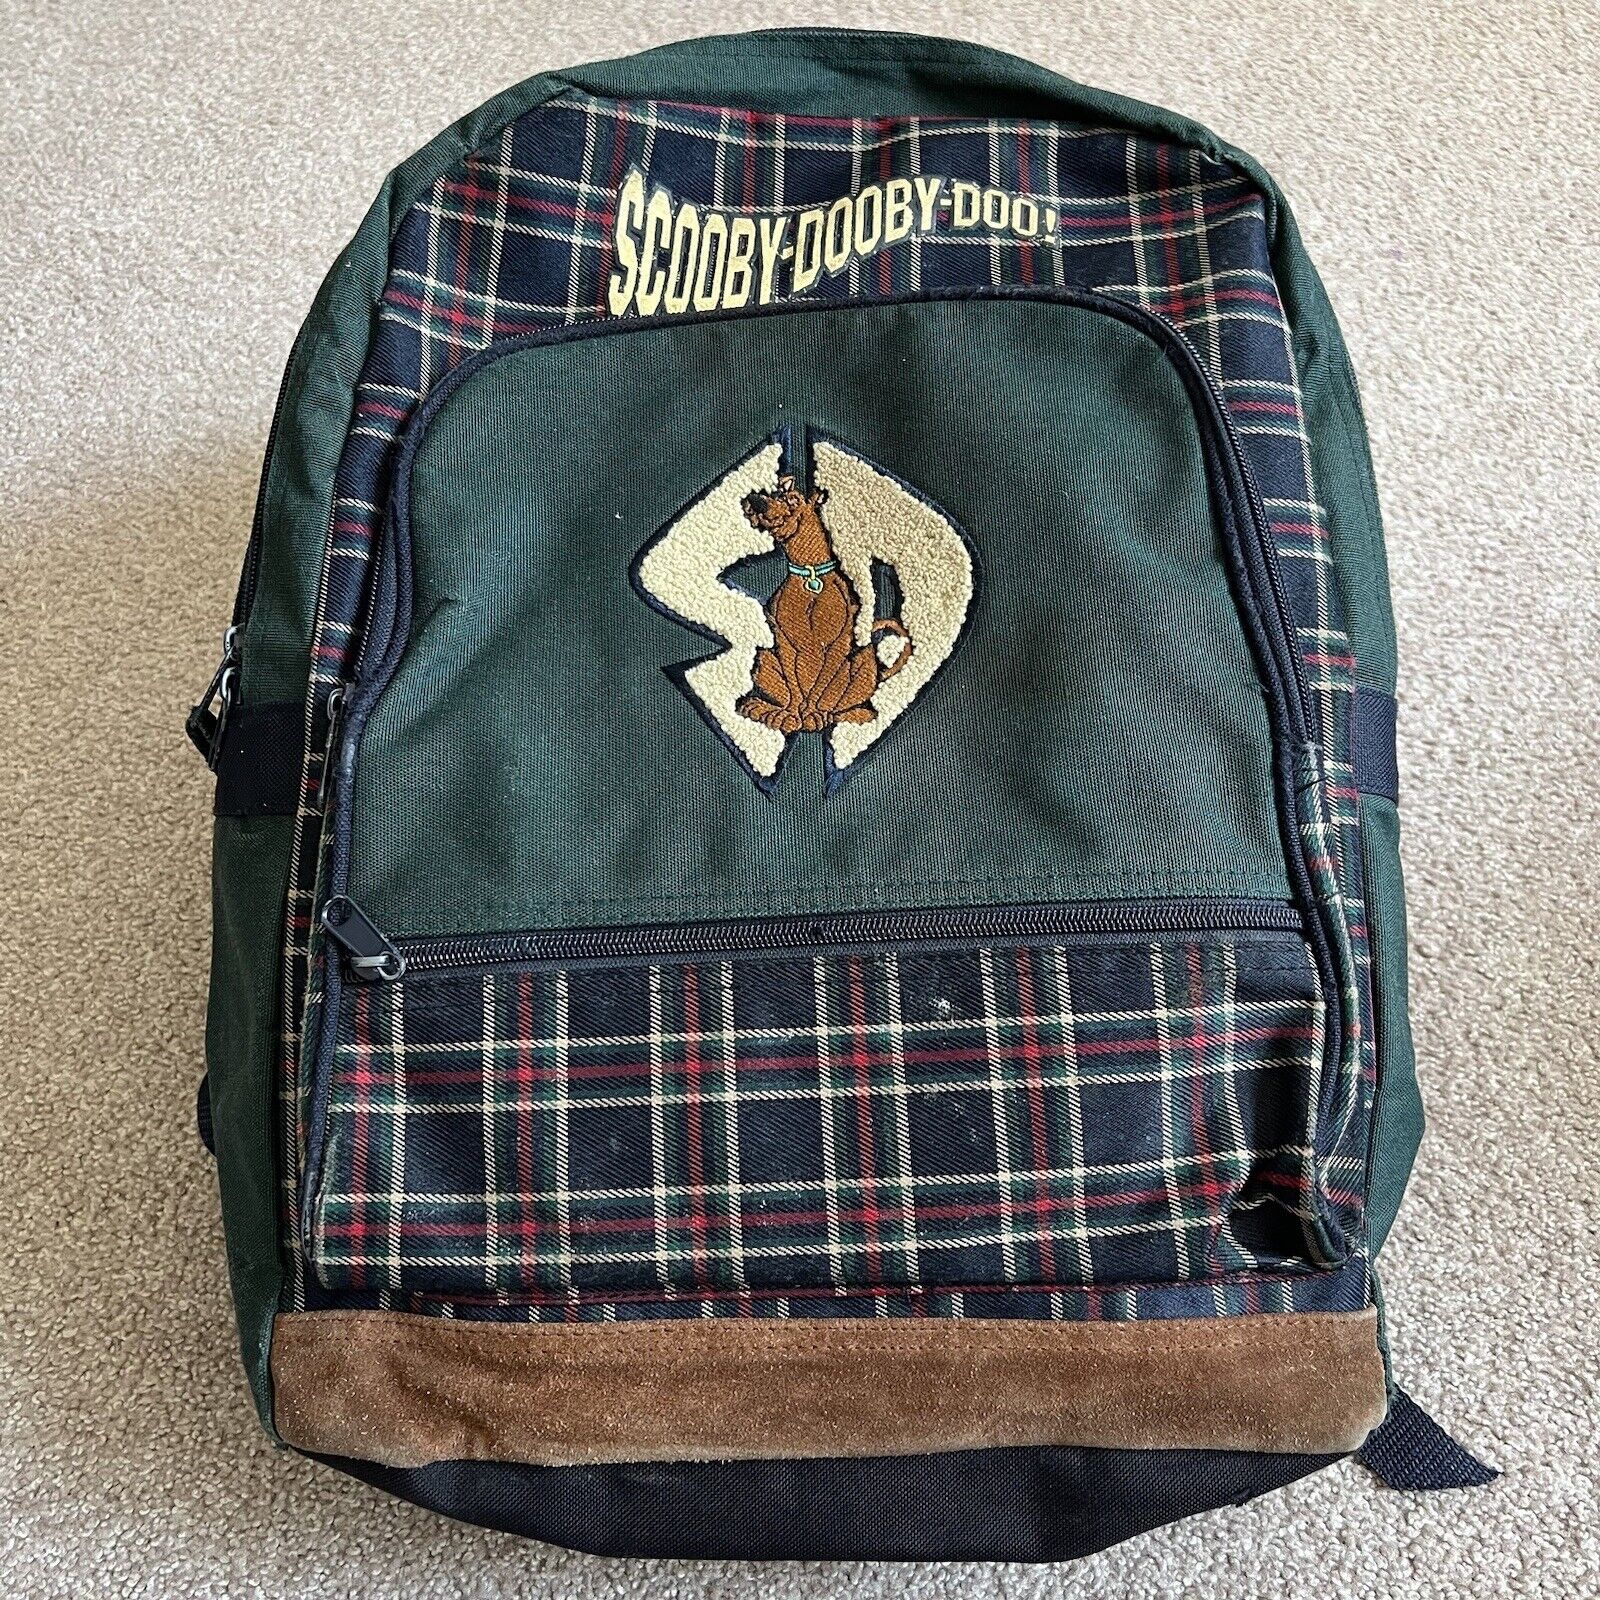 Vintage 90’s Scooby-Doo backpack Cartoon Network embroidered Rare